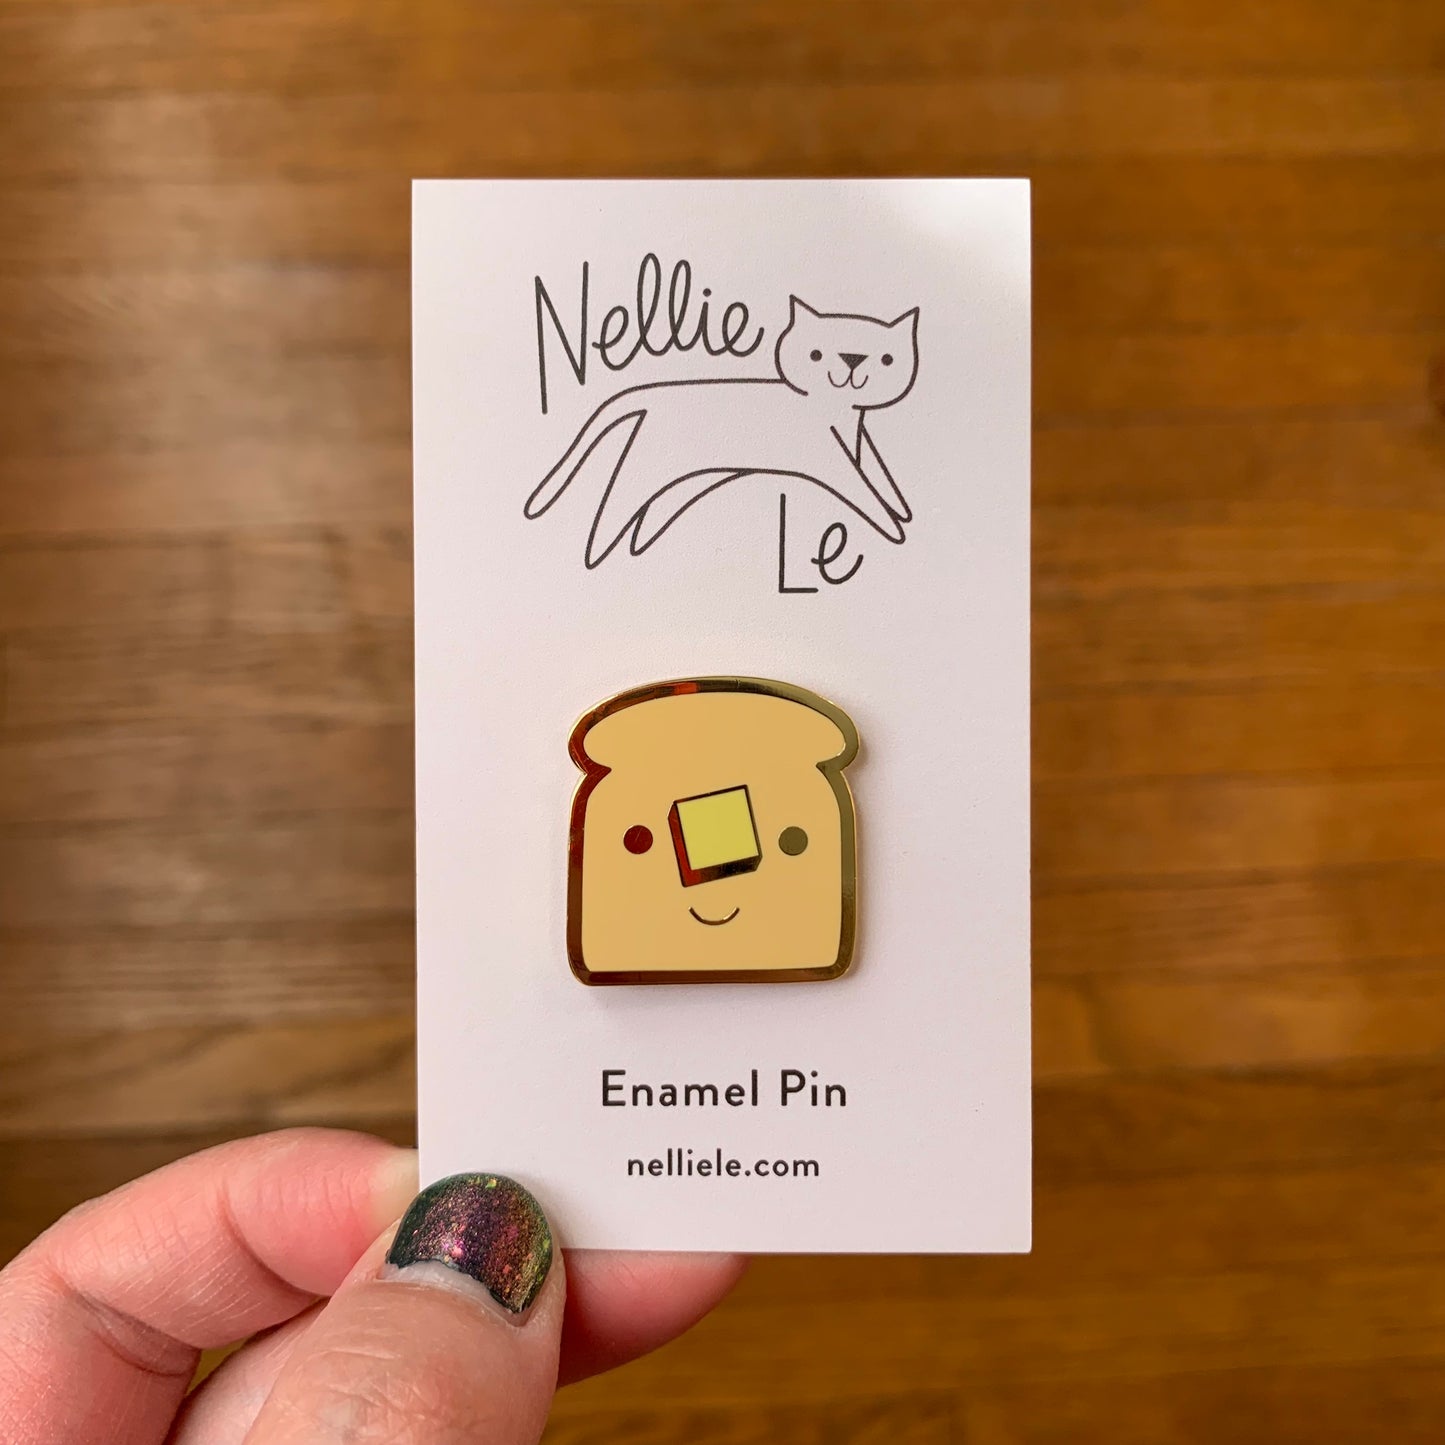 Buttered Toast Pin